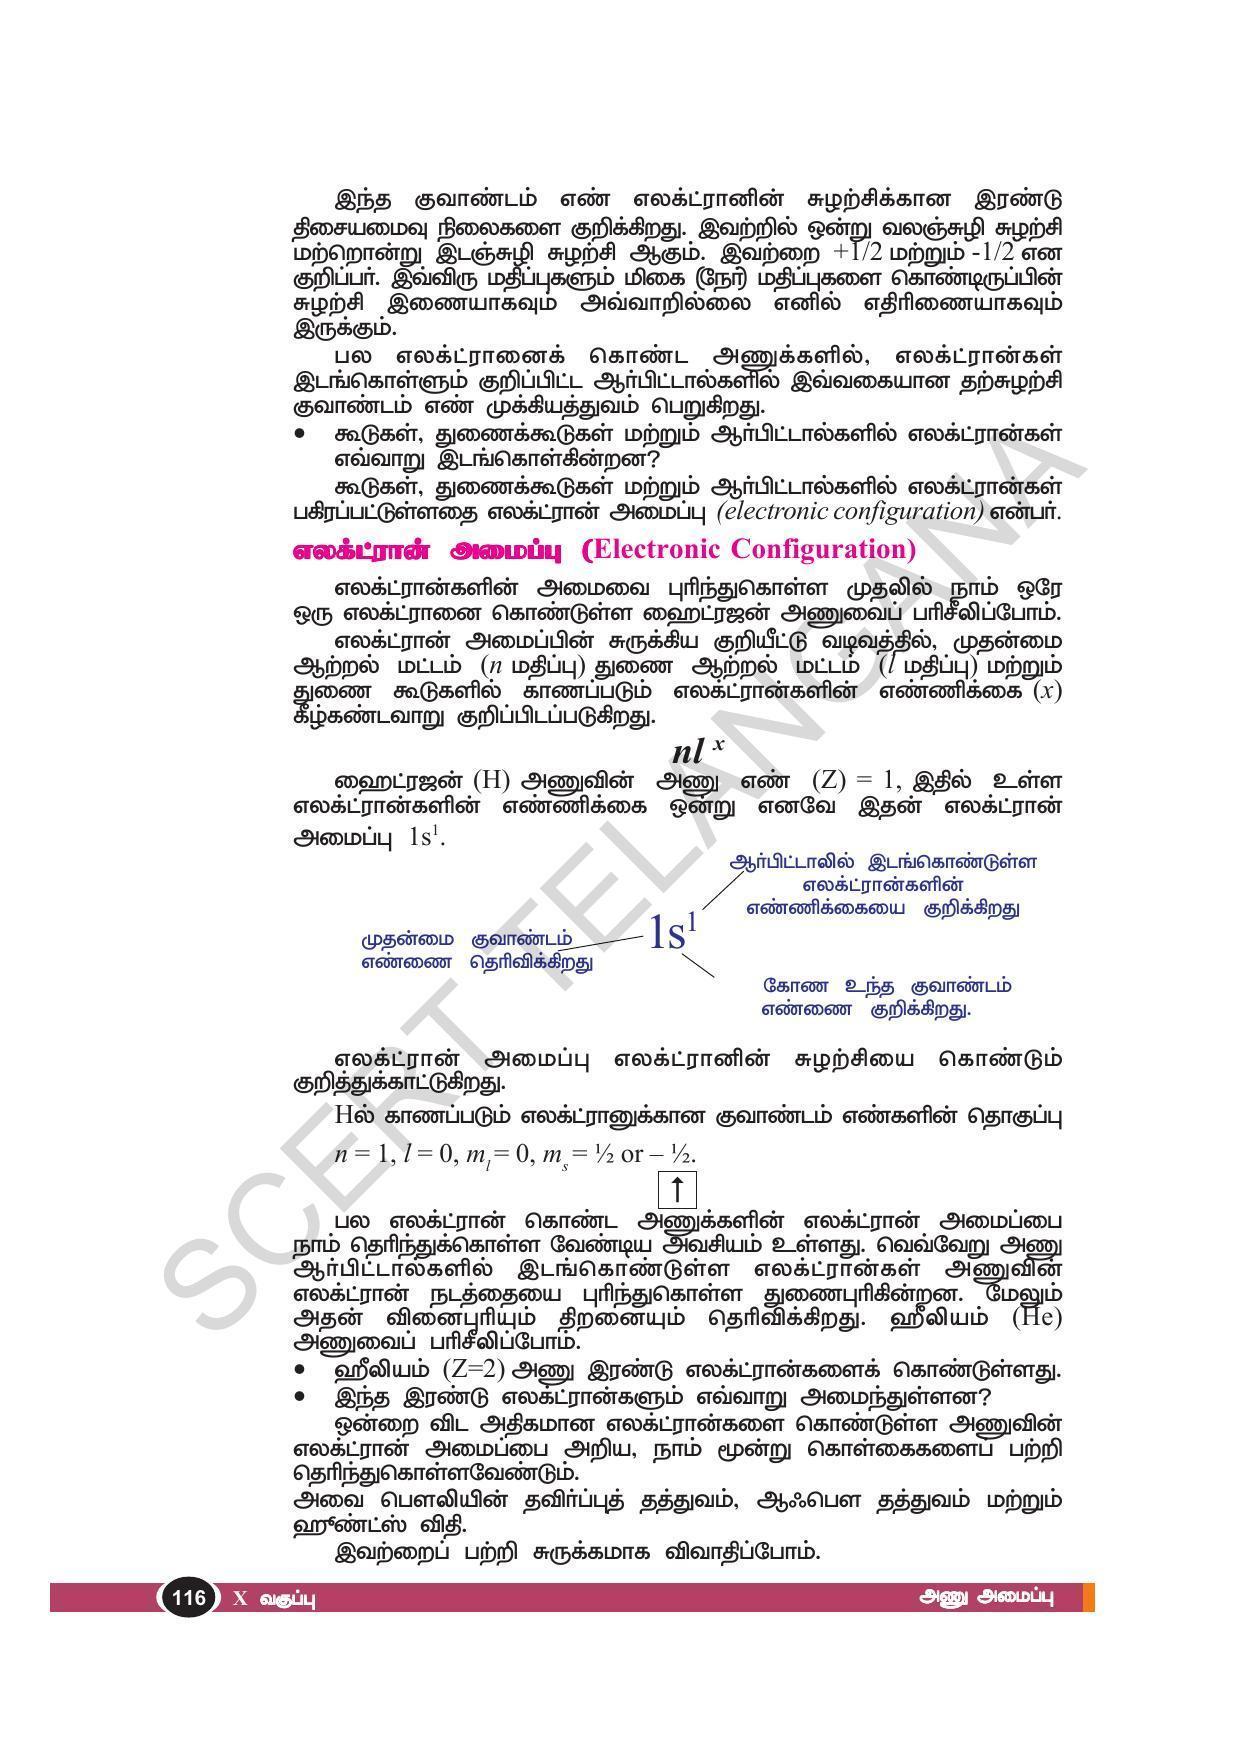 TS SCERT Class 10 Physical Science(Tamil Medium) Text Book - Page 128